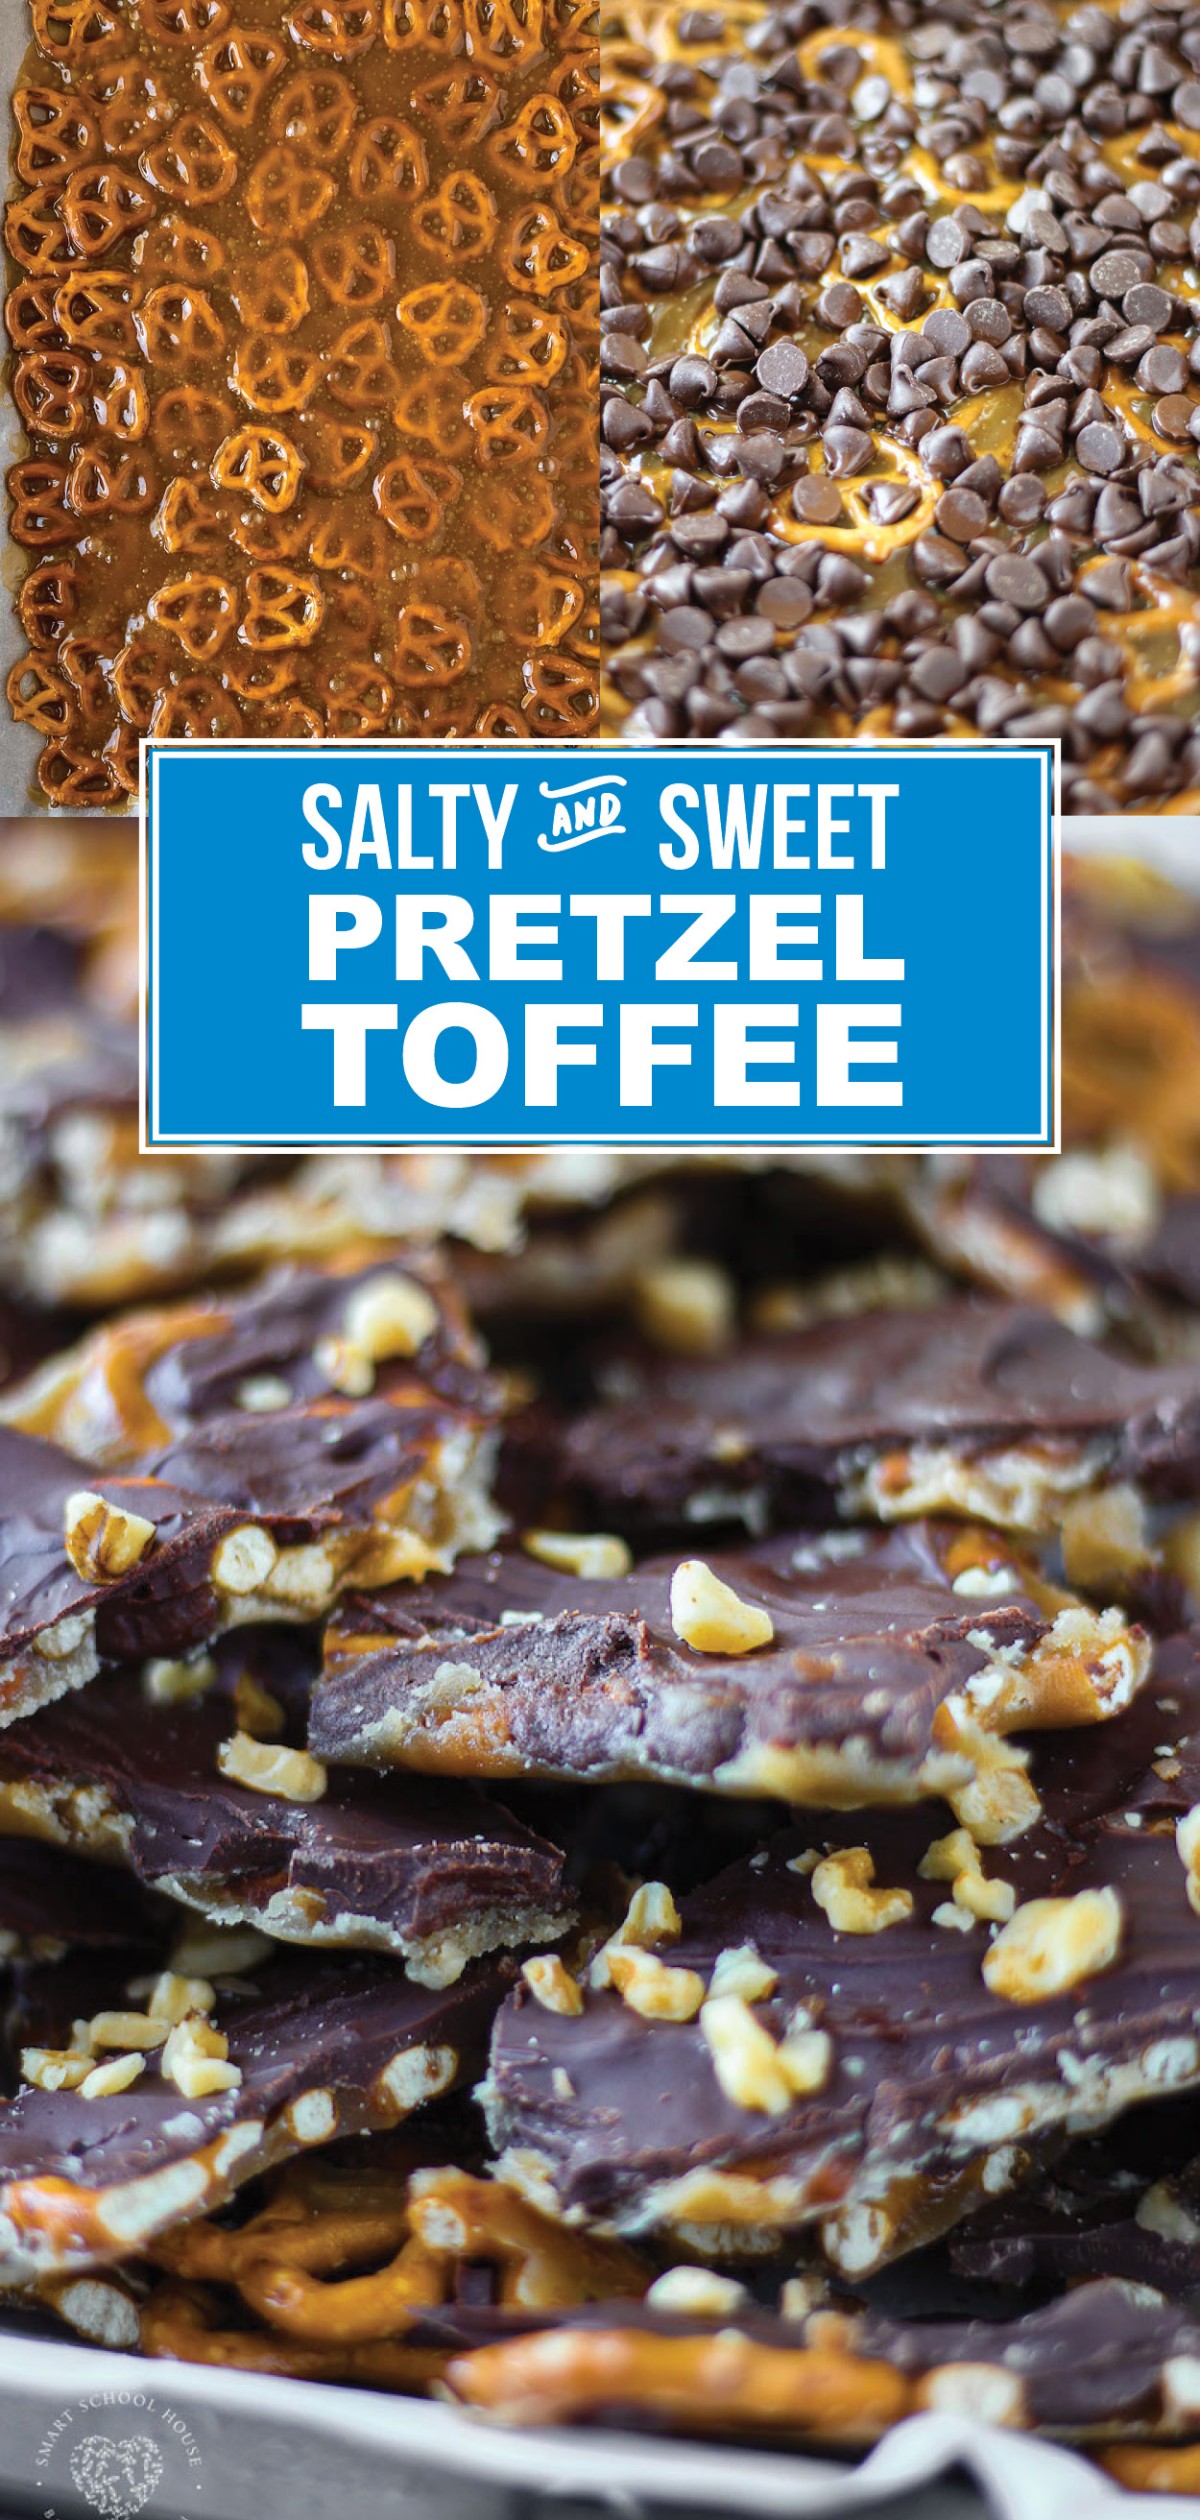 This Chocolate Toffee Pretzel Bark is salty, sweet, buttery PERFECTION! It is so easy to make and it tastes delicious! You can make it for your friends and family as a holiday dessert. 